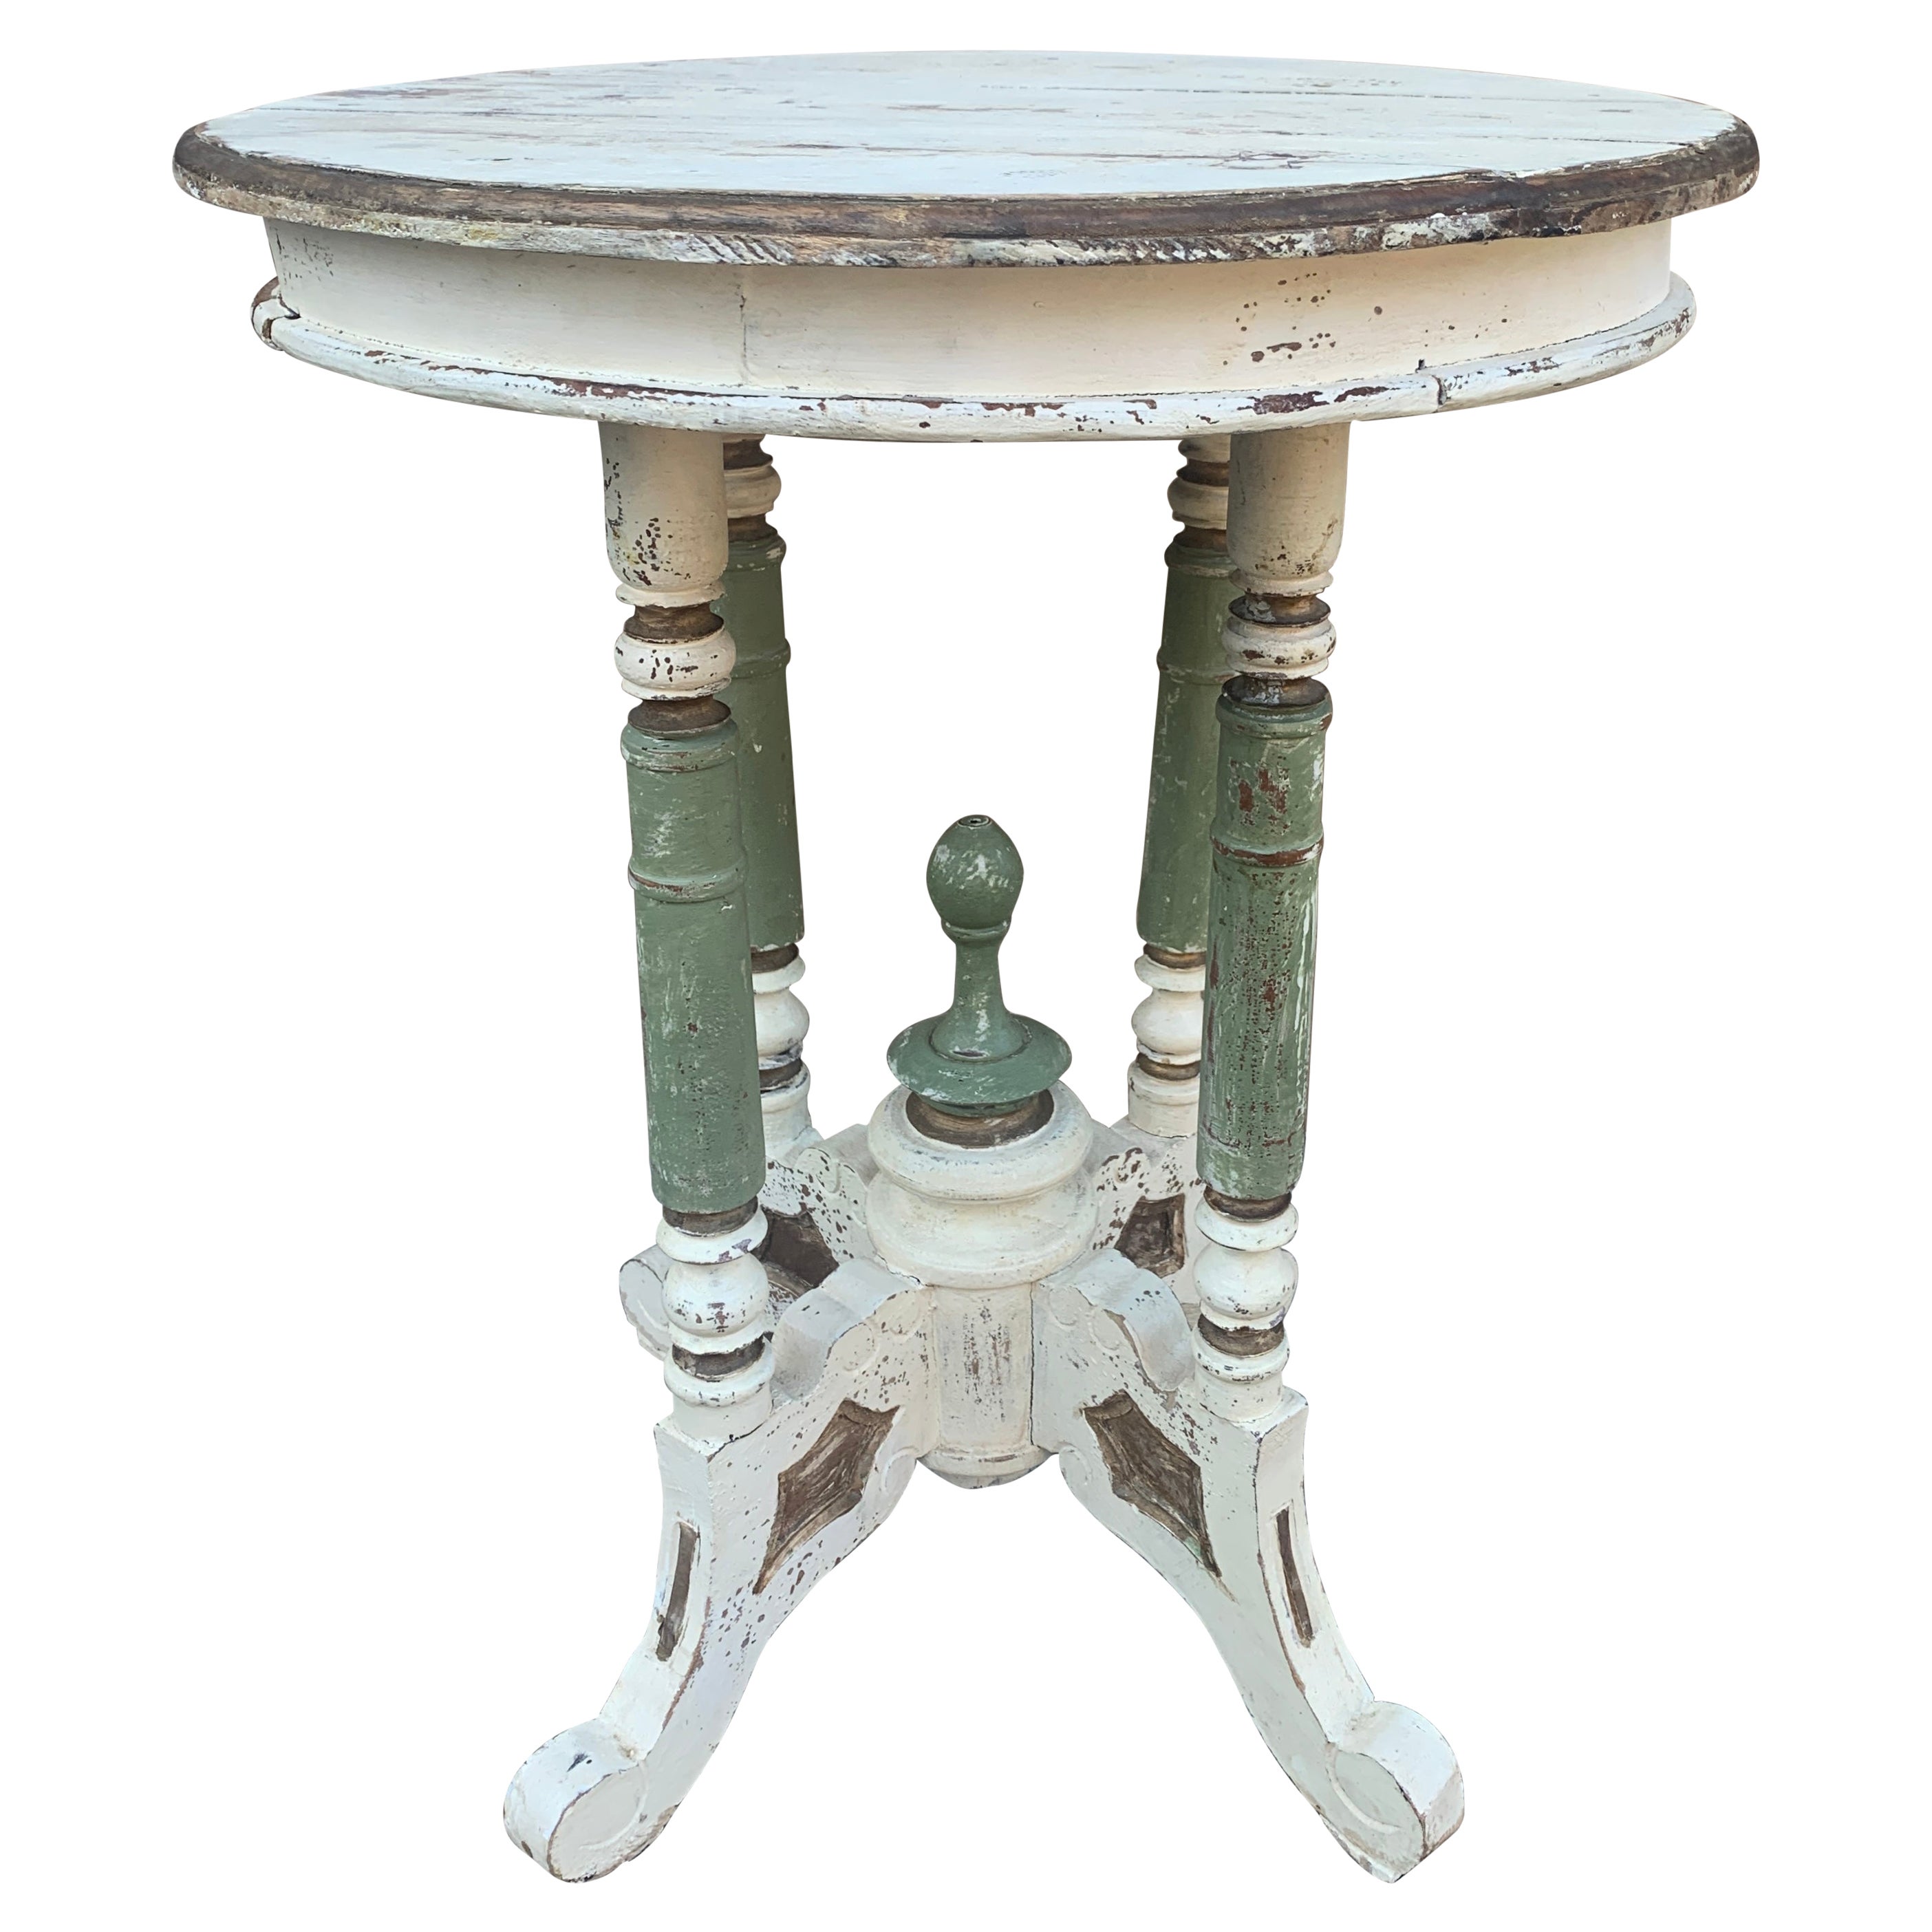 Antique American Victorian Round Painted Walnut Side Table, Late 19th Century